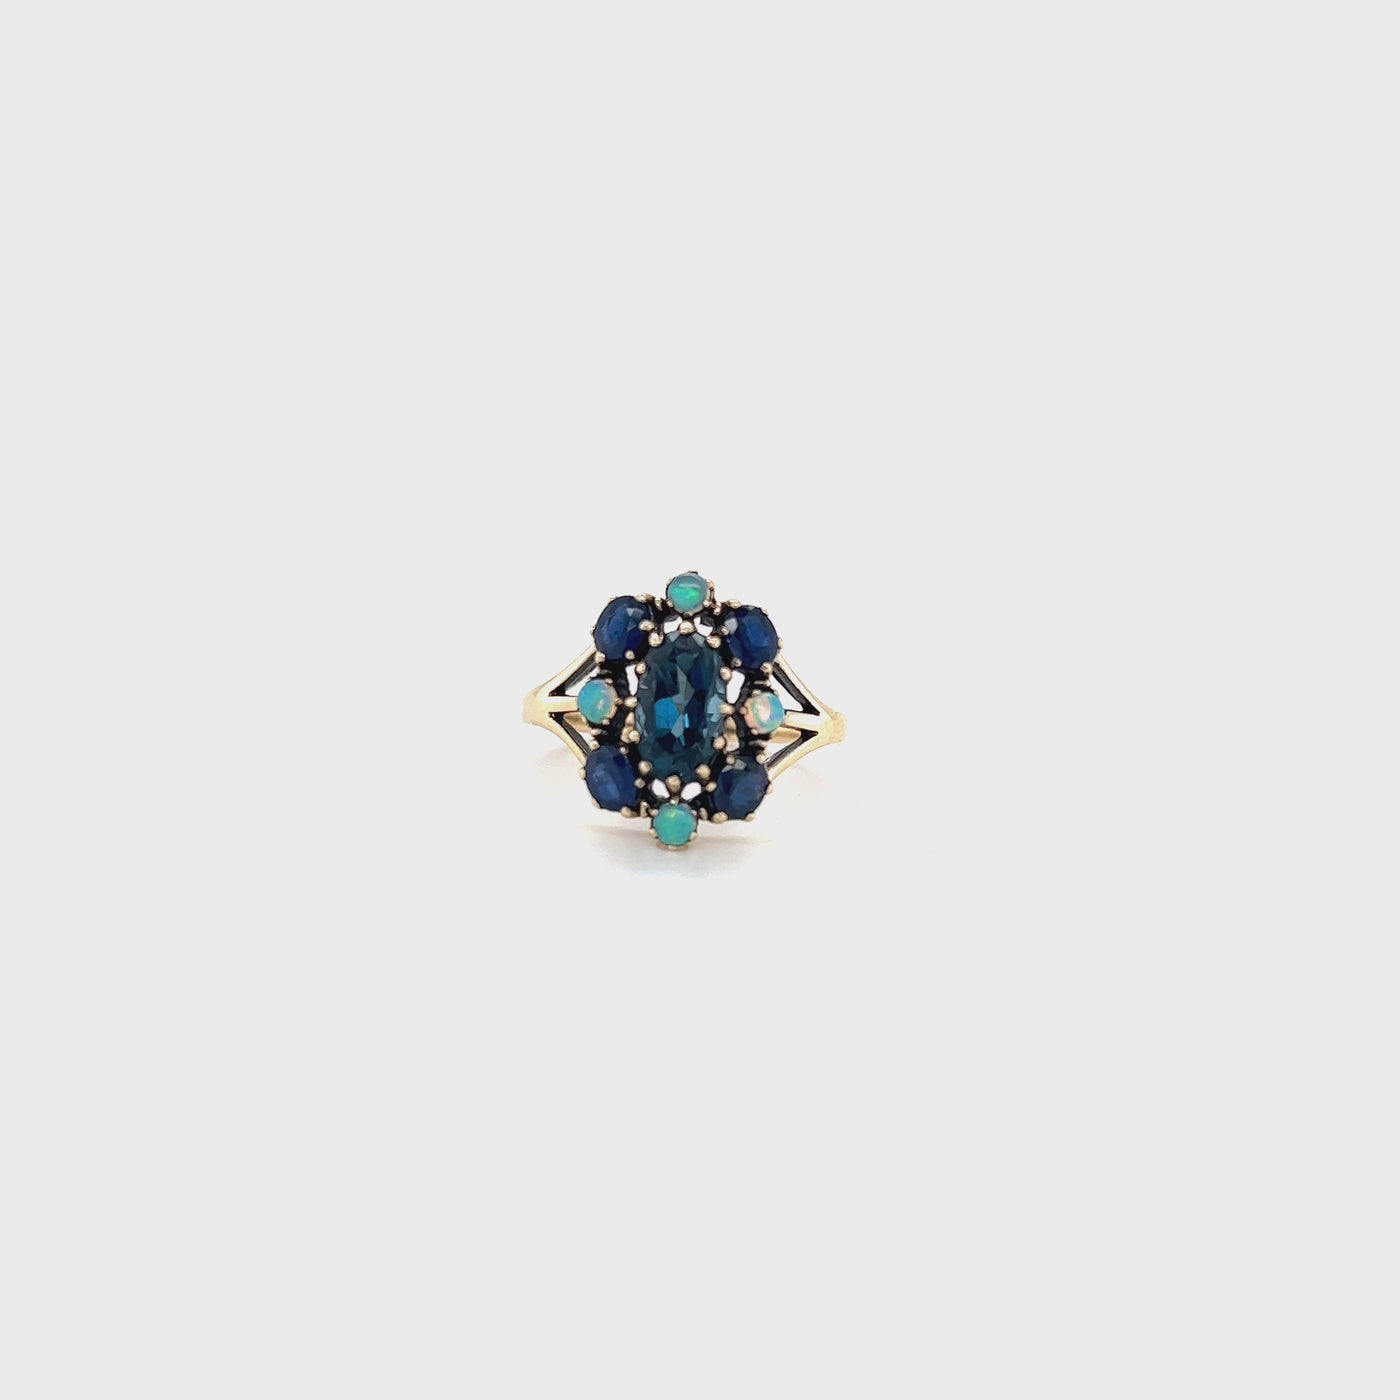 9 carat yellow gold ring with london blue topaz, sapphire and opals.